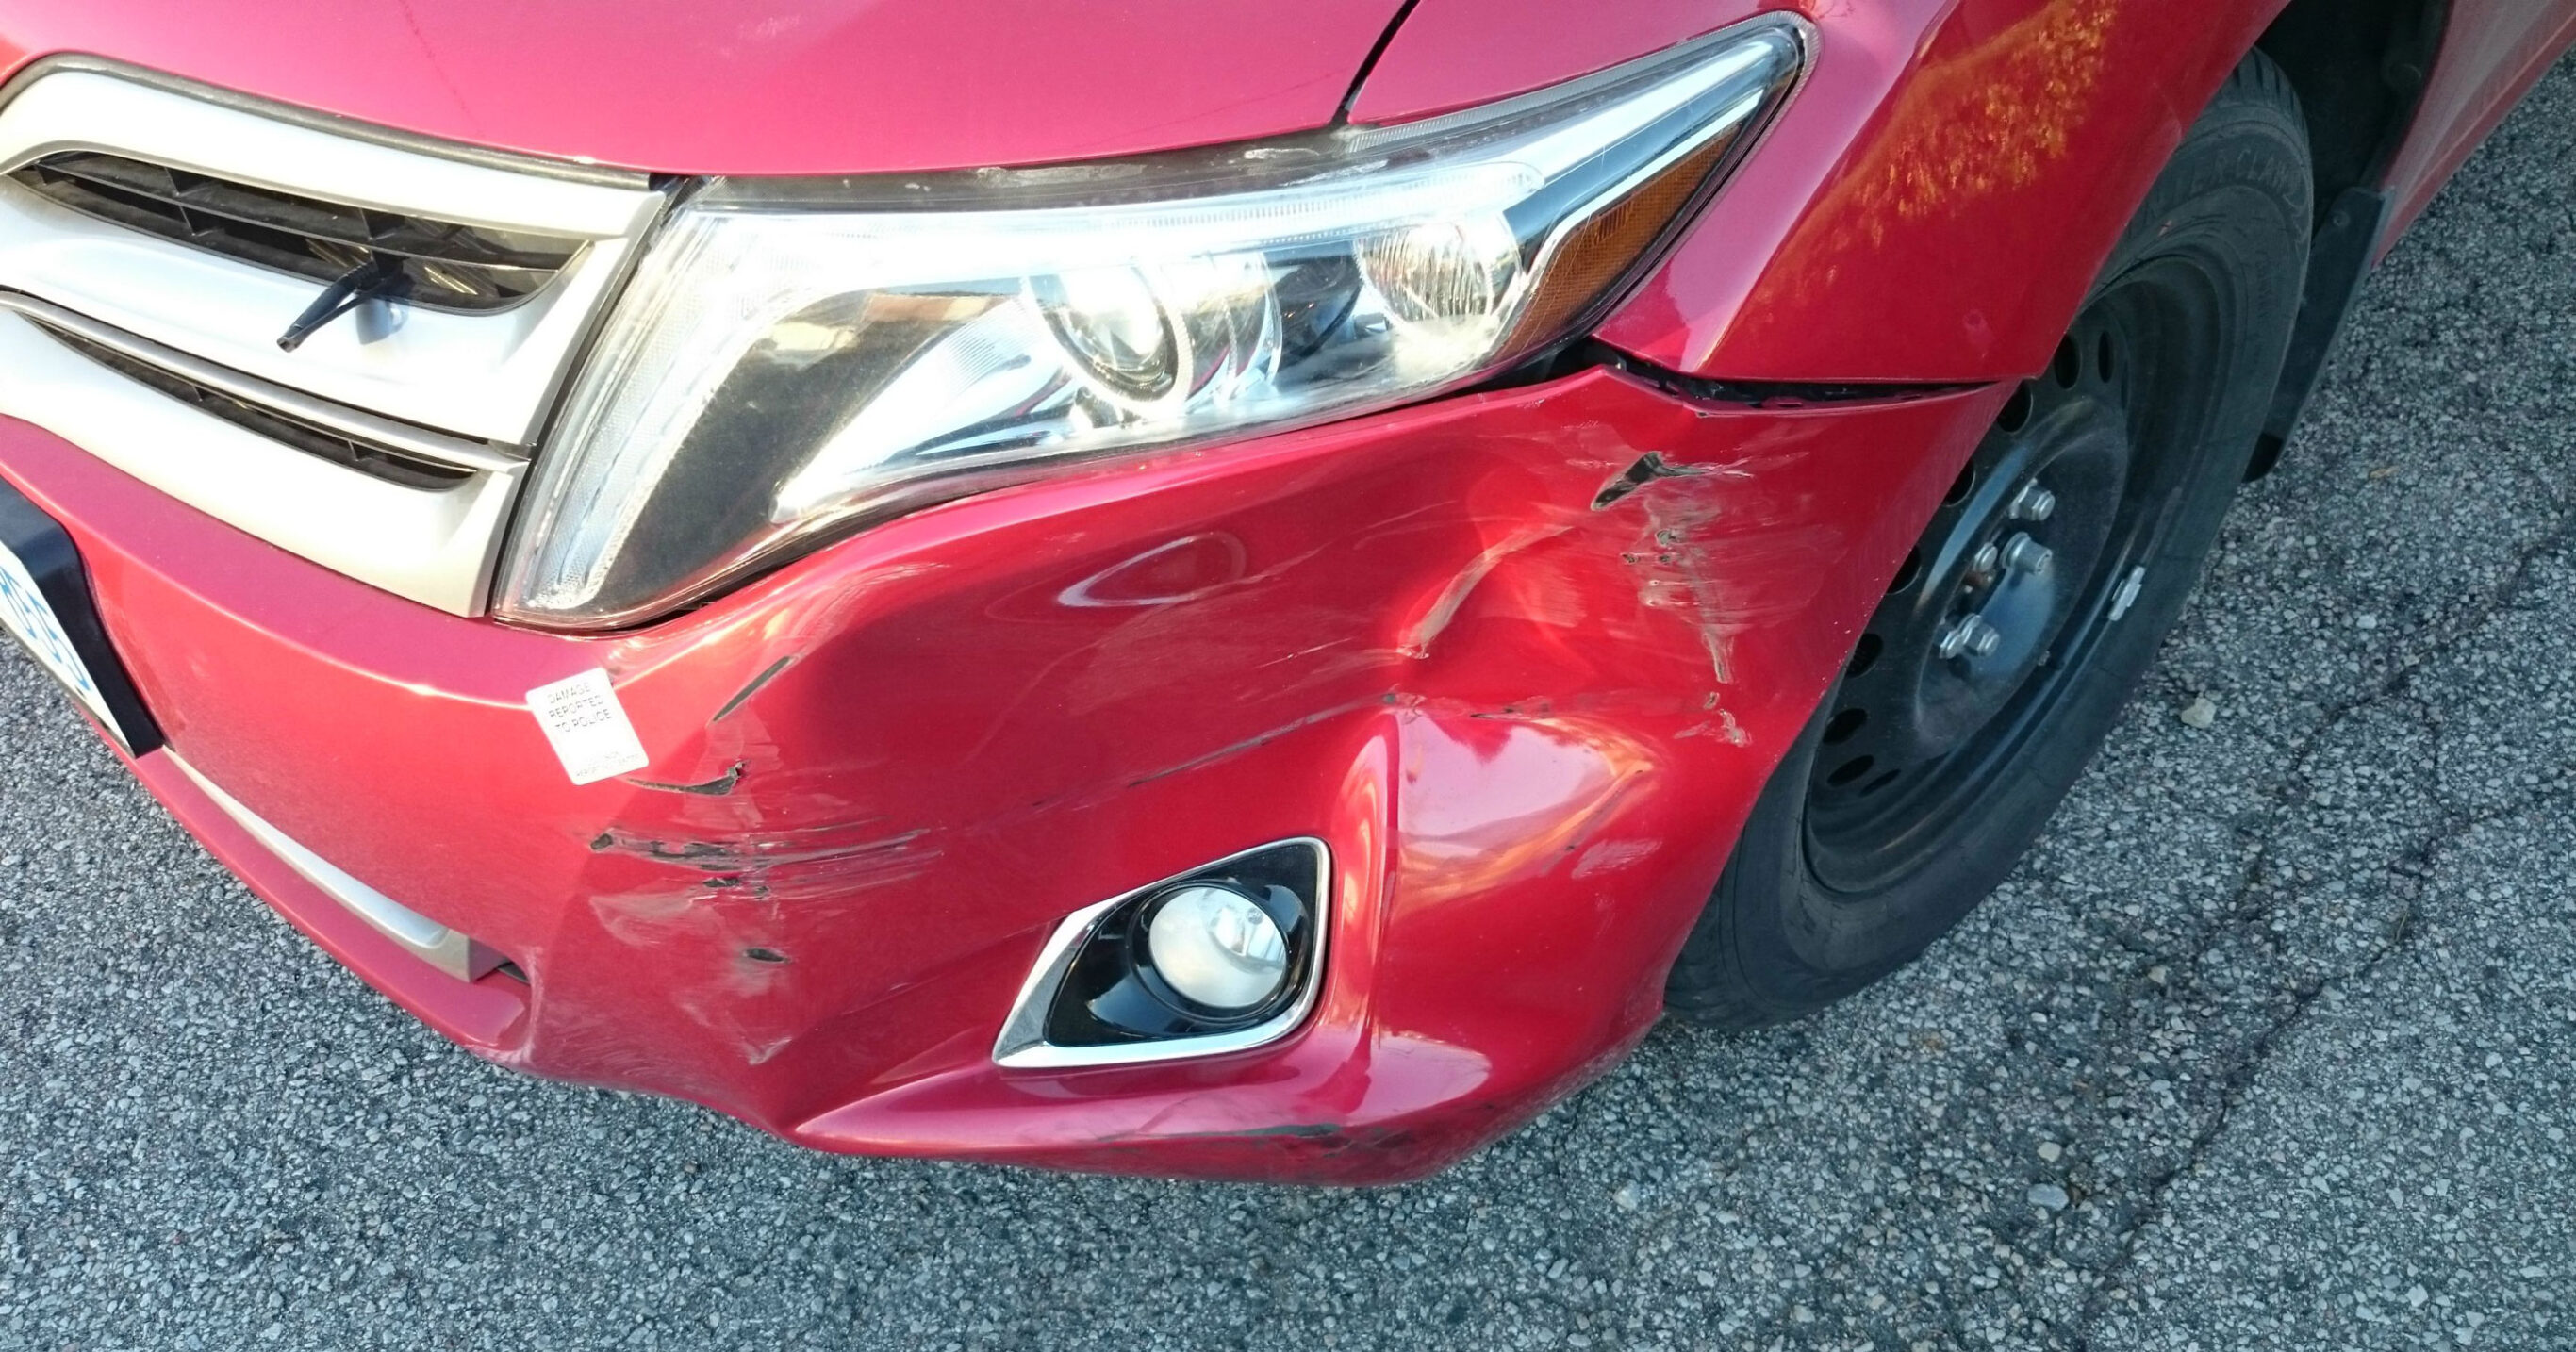 Fender-benders in mini cars can be costly